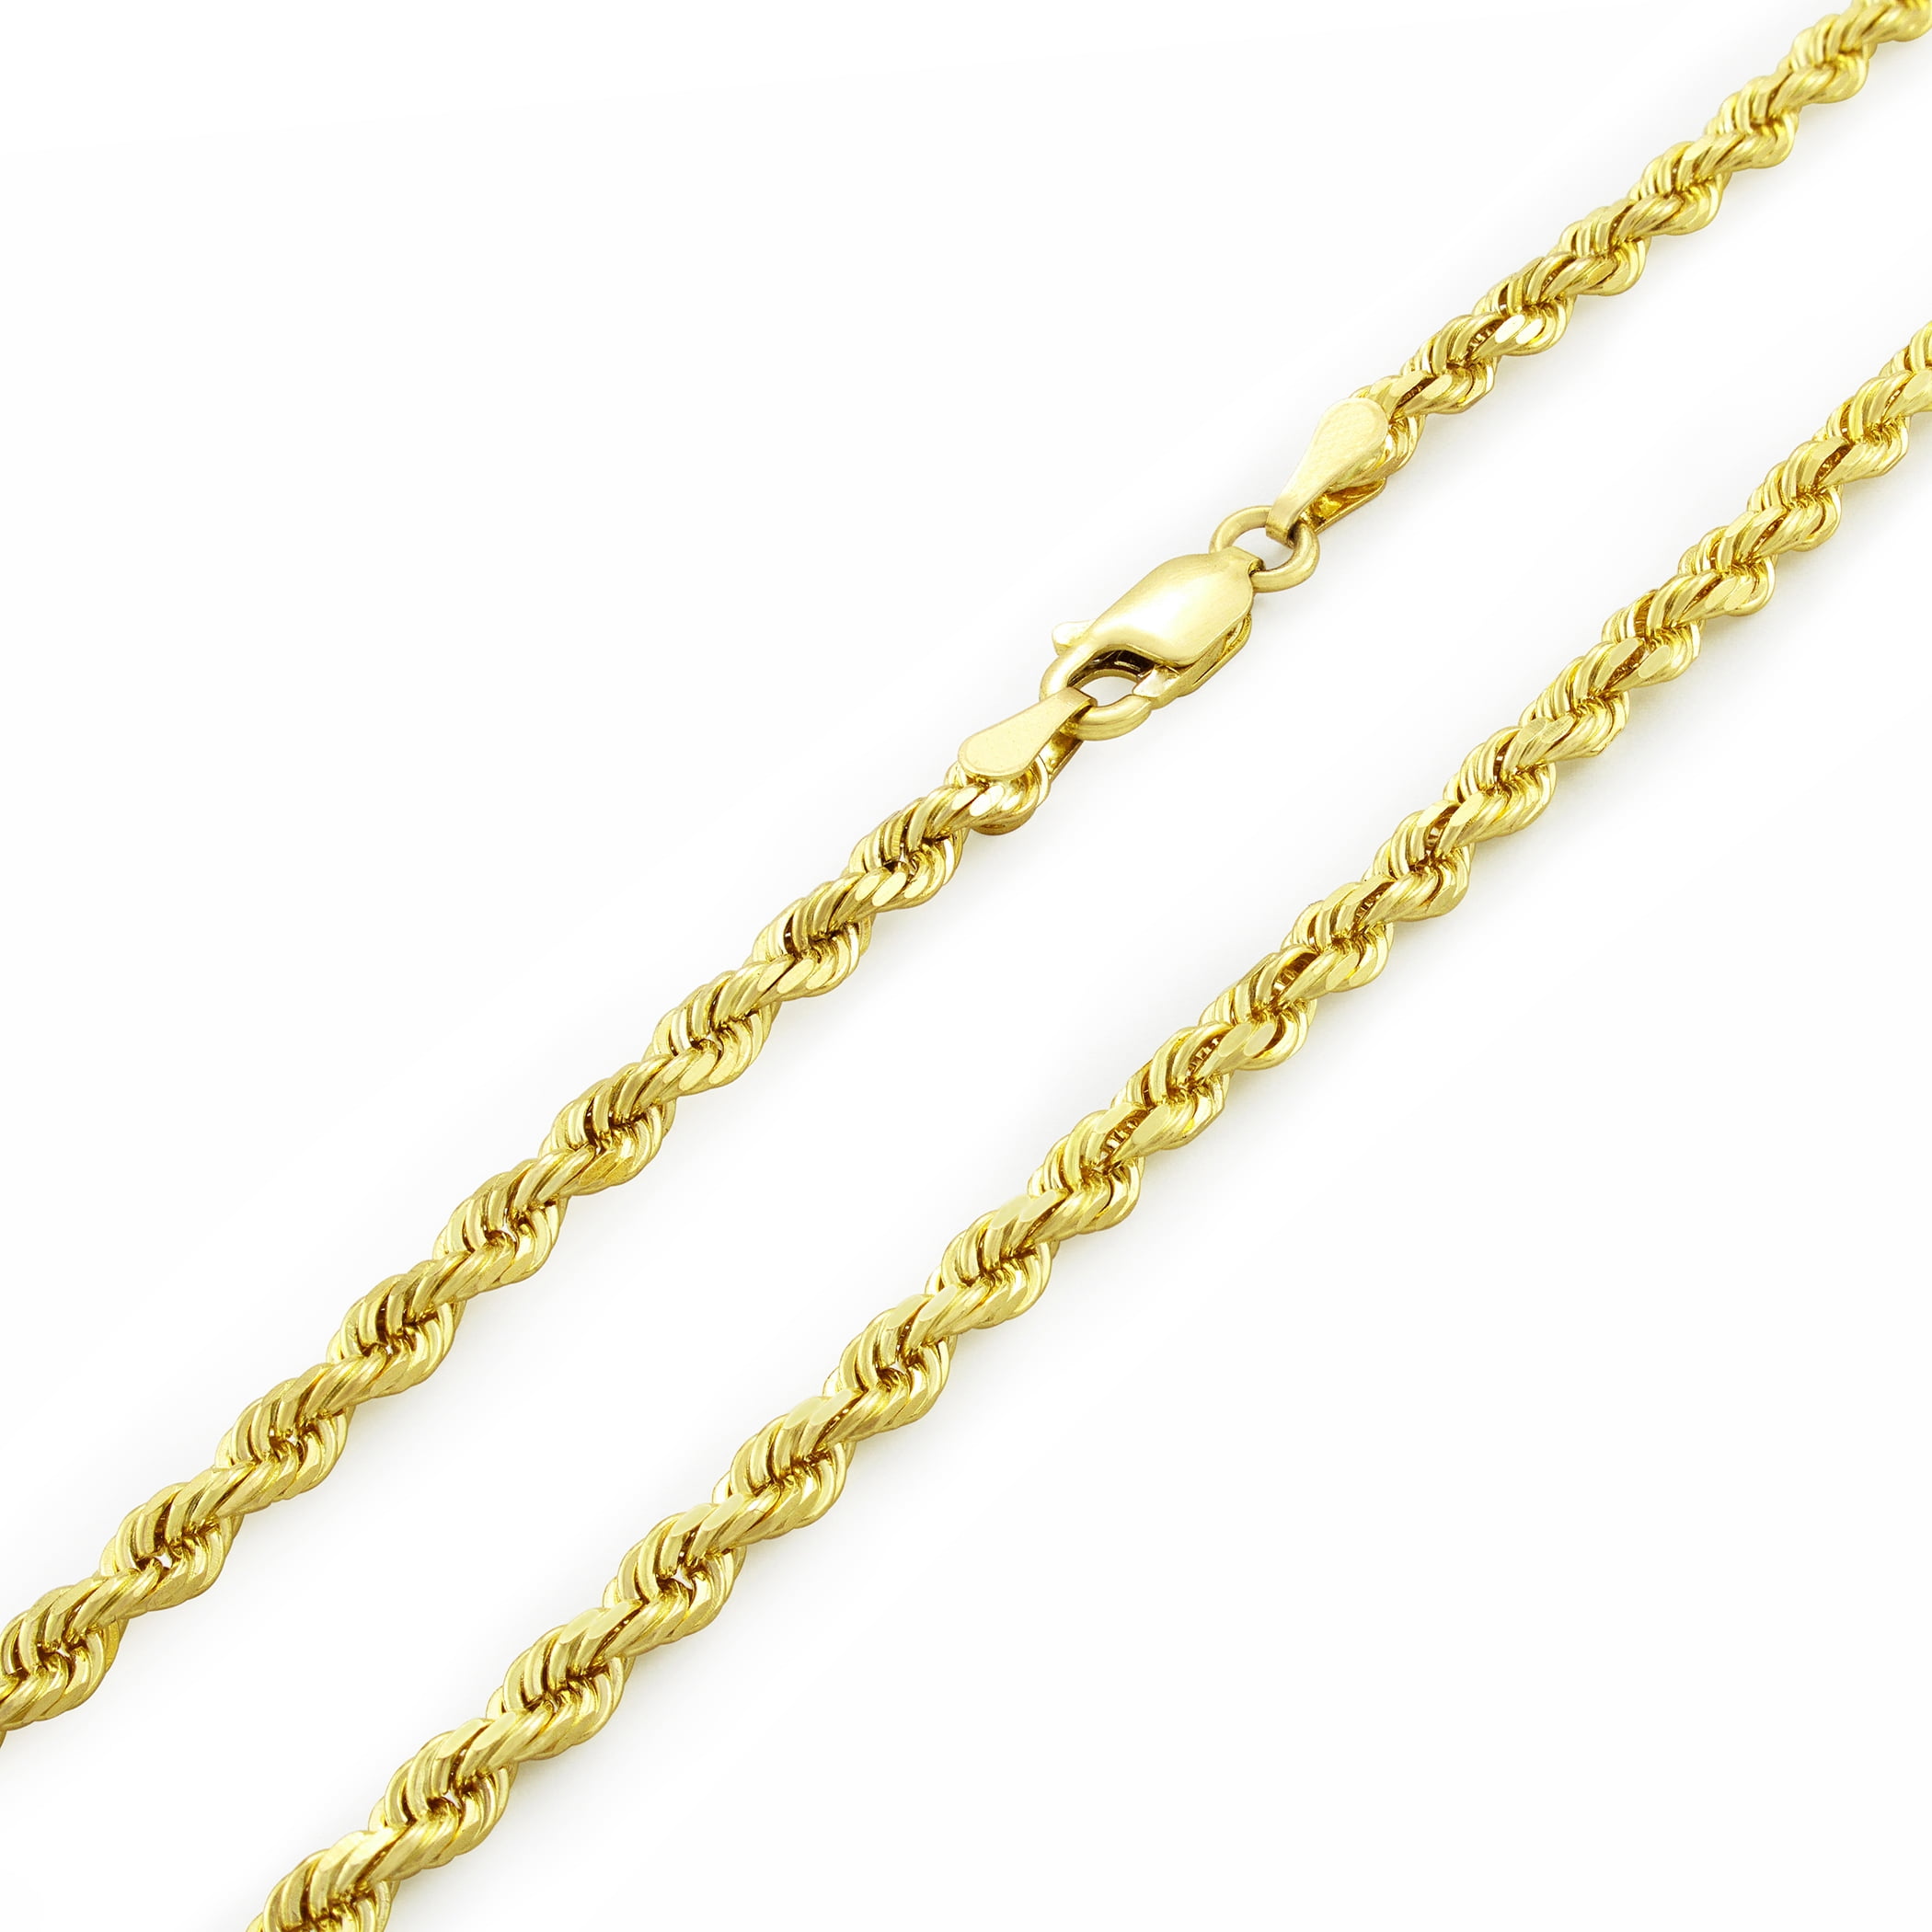 18 INCHES LONG ROPE CHAIN 14KT GOLD ROPE CHAIN WITH LOBSTER LOCK